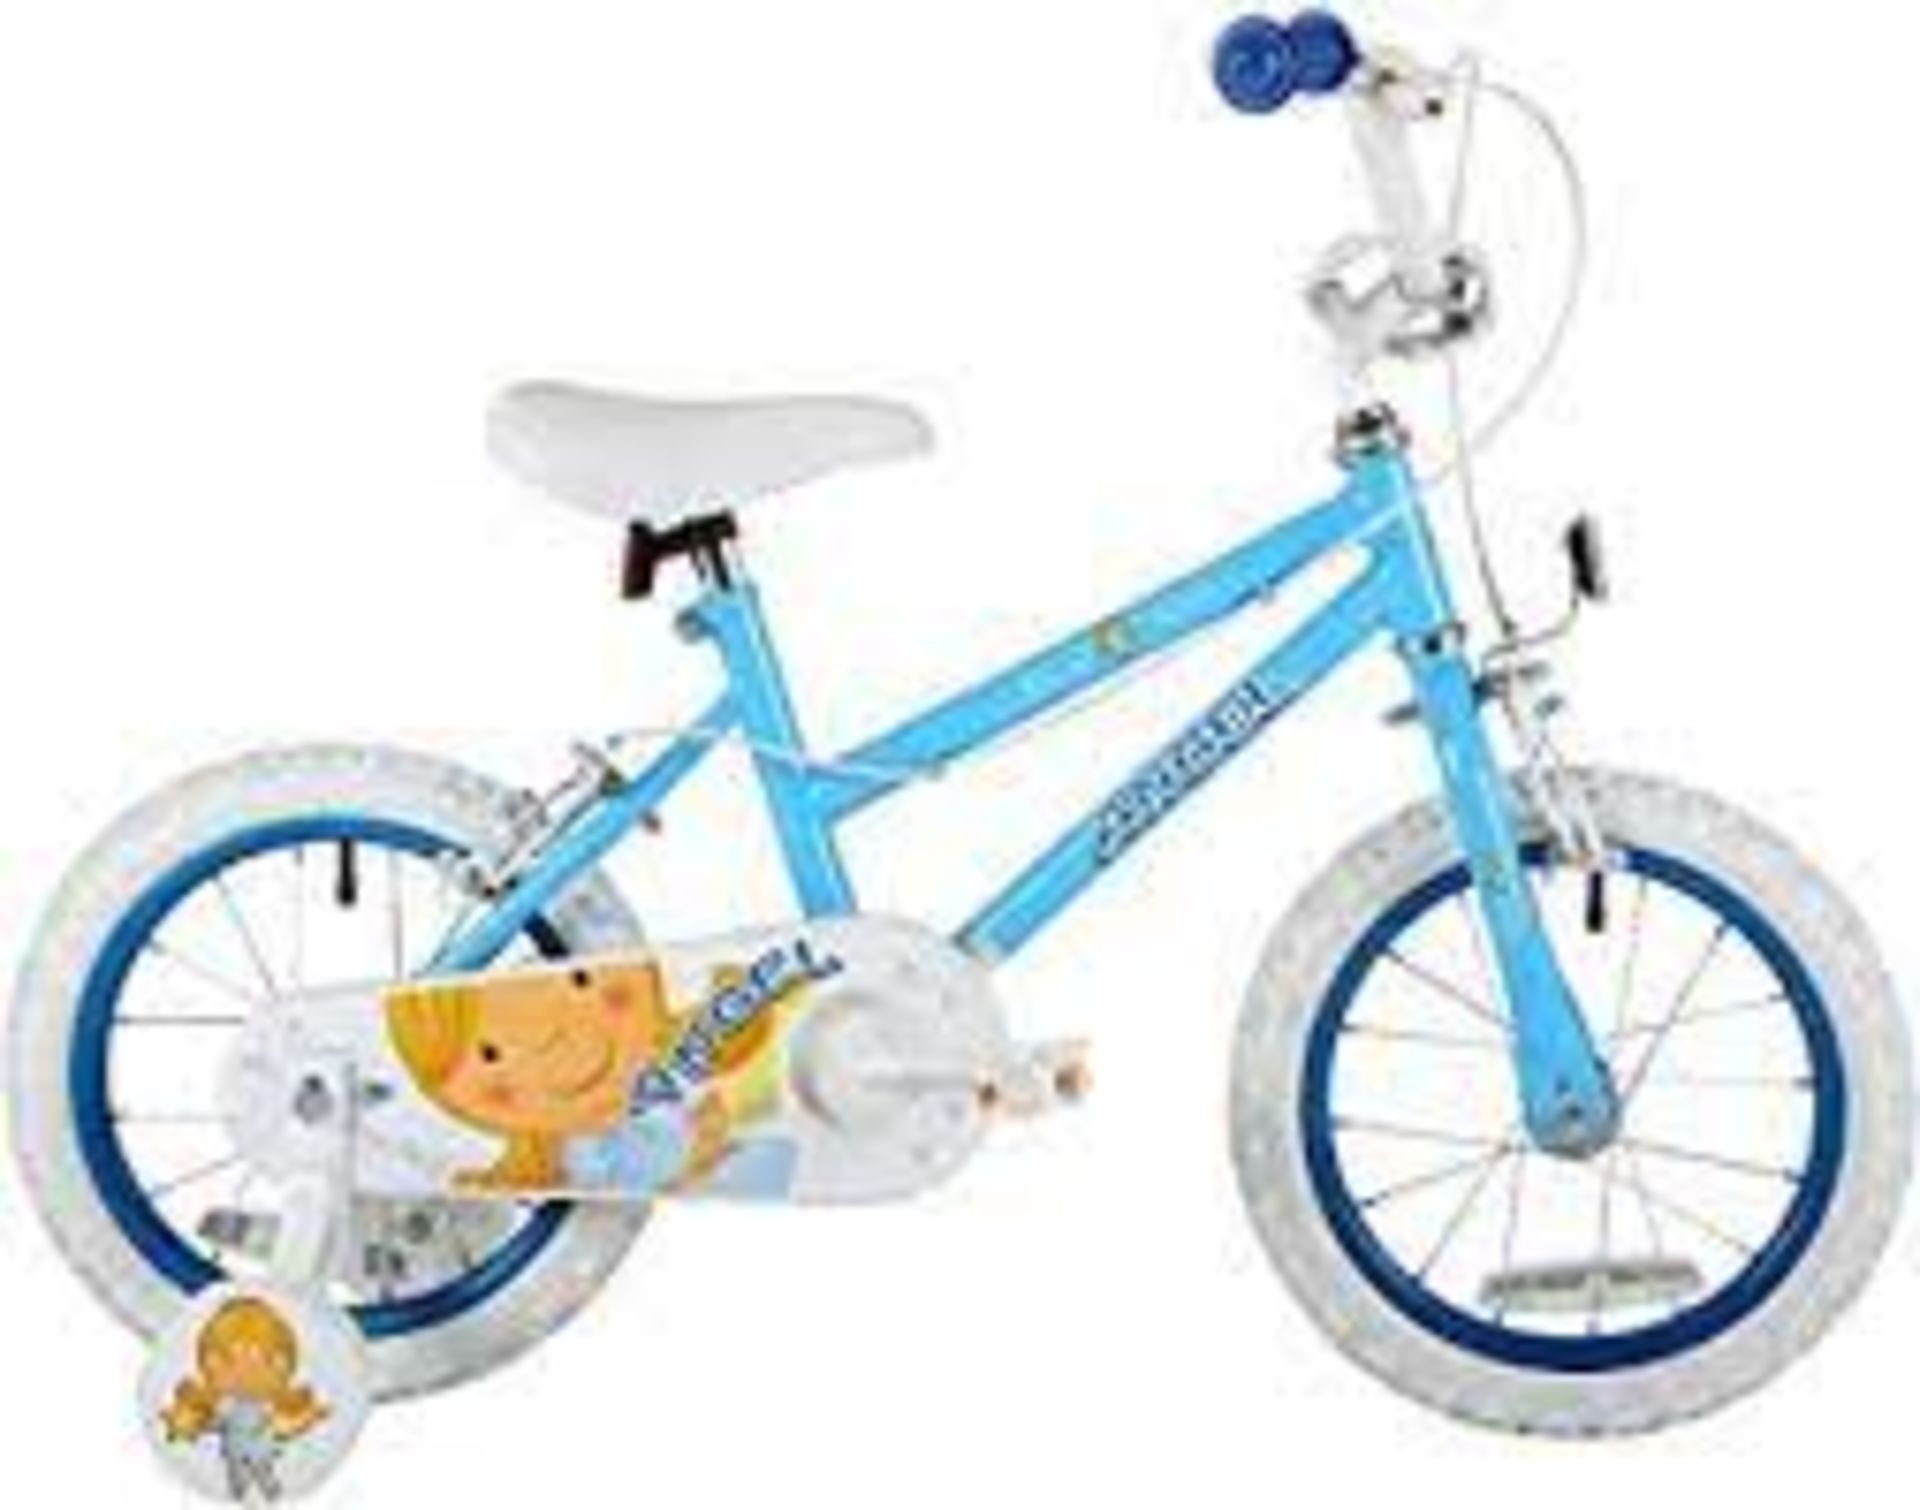 New & Boxed Sonic Angel Girls 14 Inch Bike. RRP £149.99. Introducing the all new Angel 14 inch